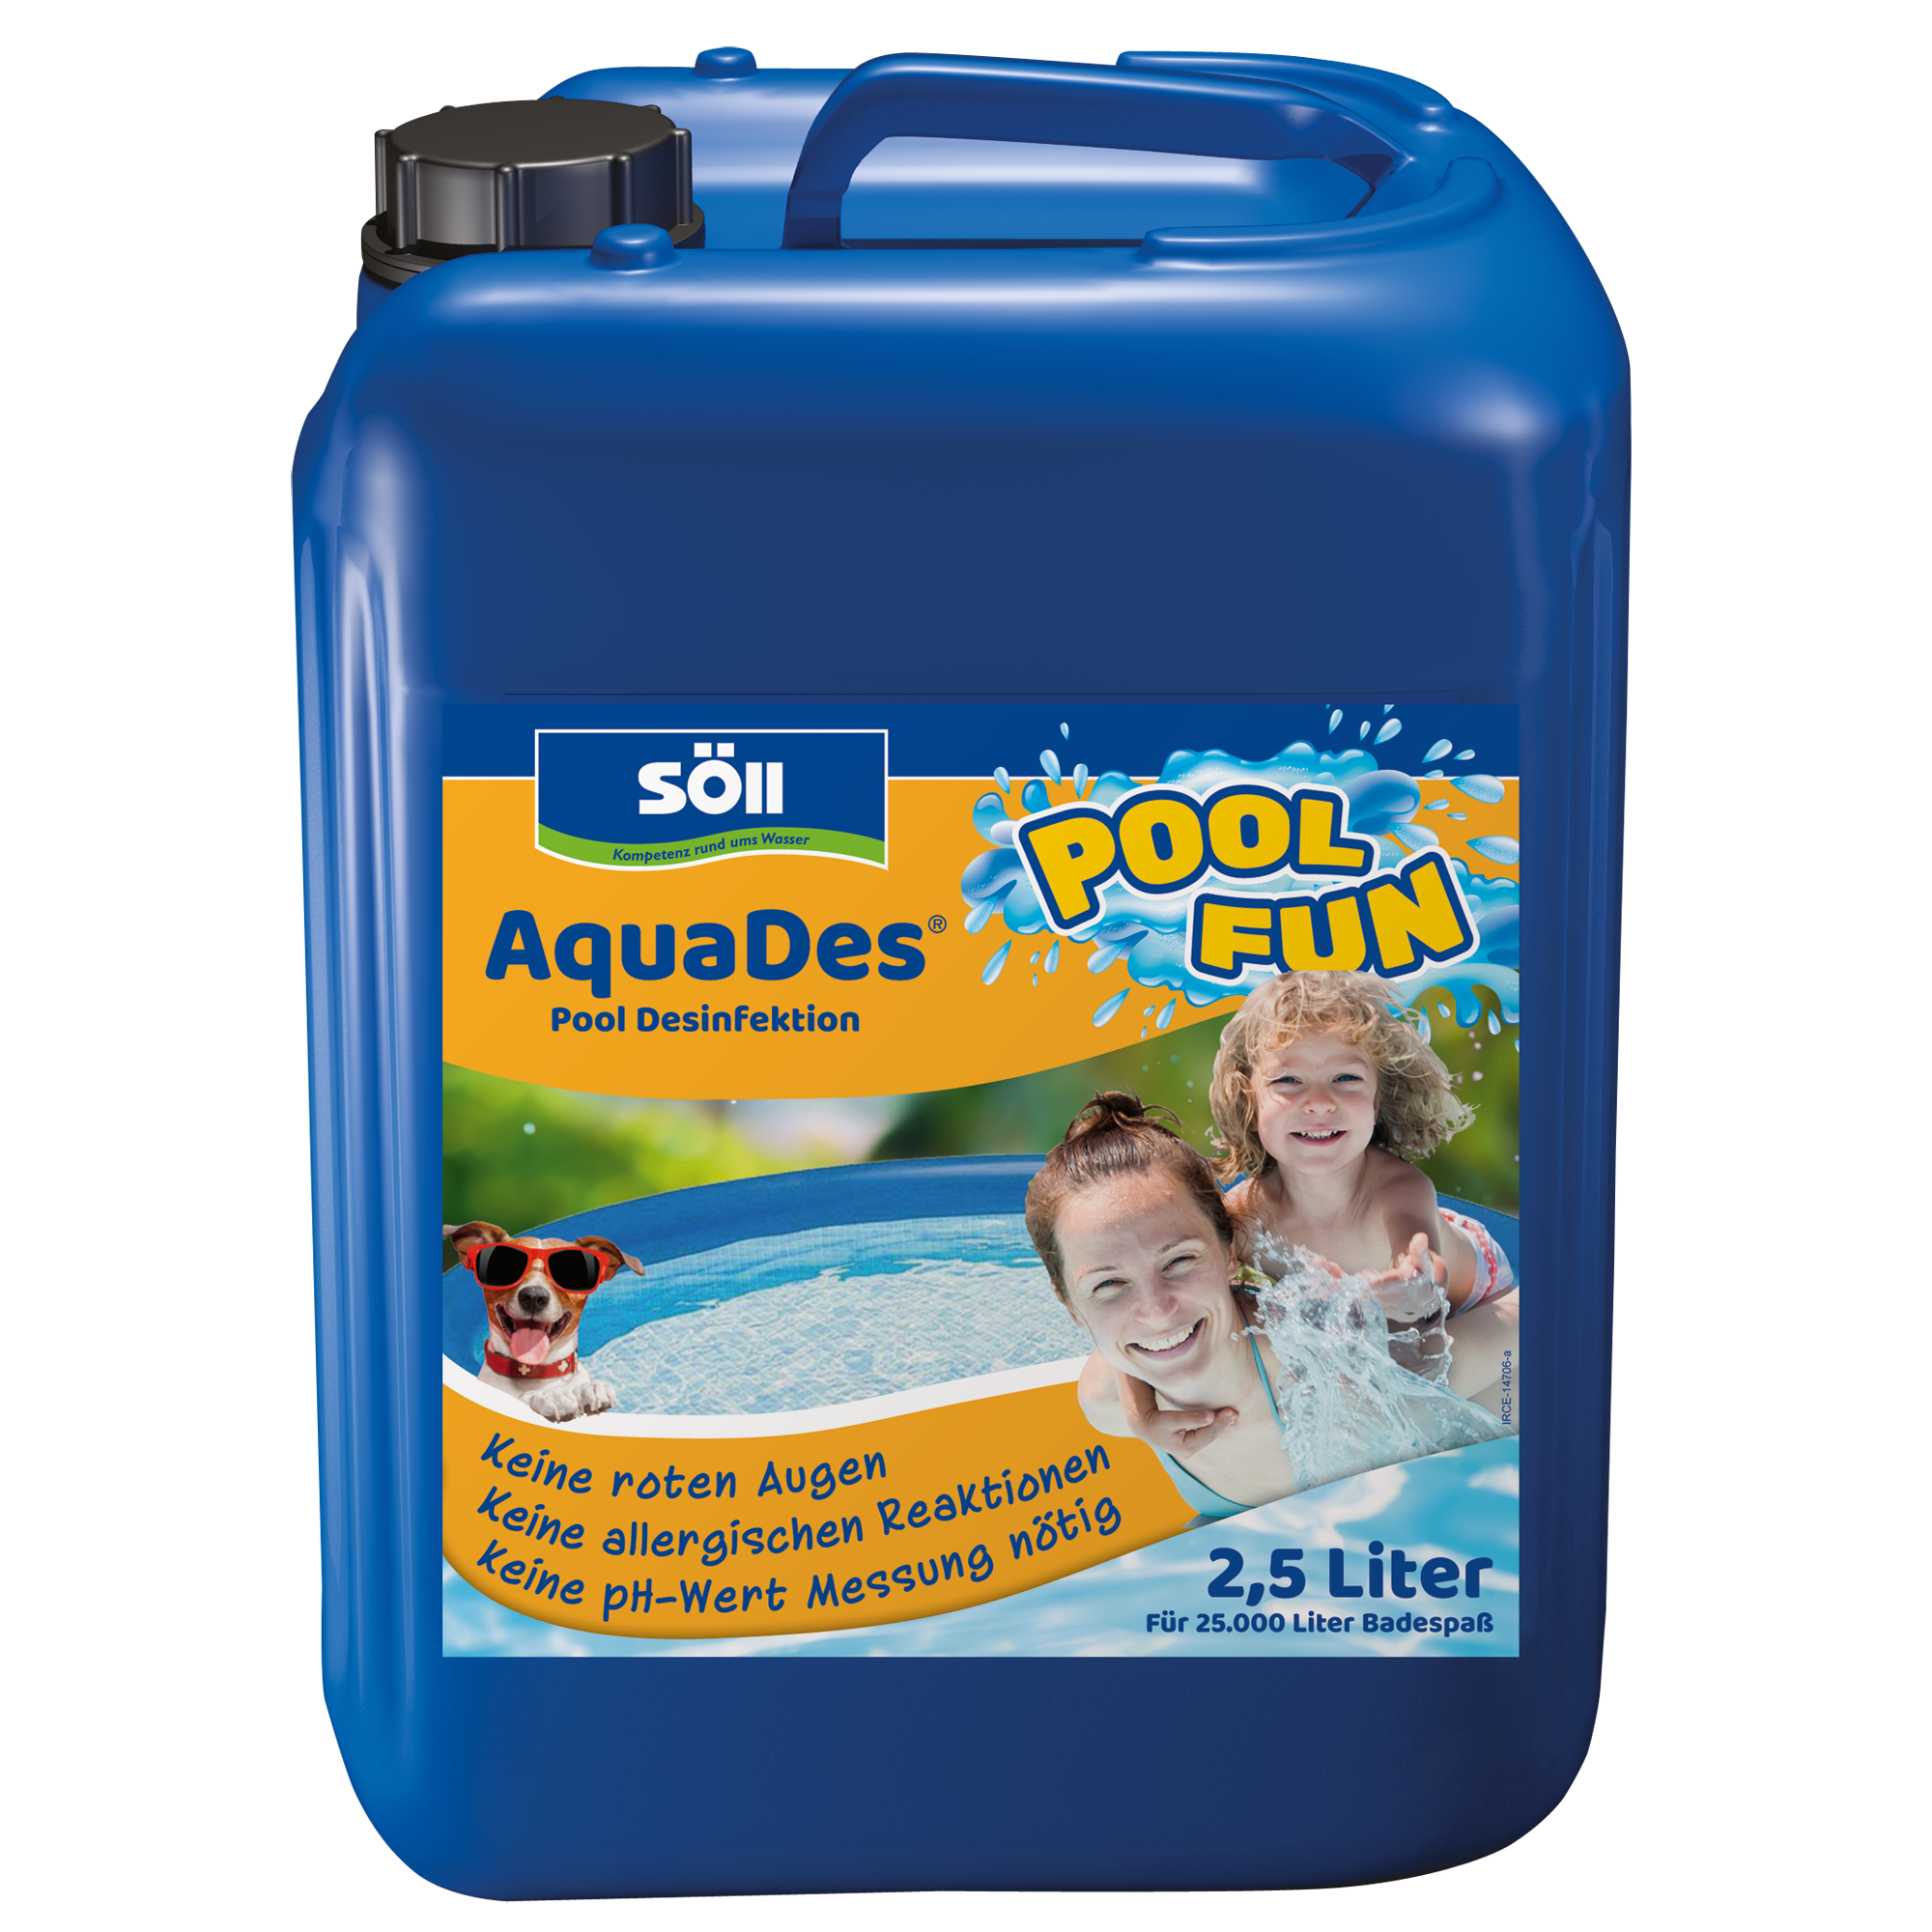 Pool-Desinfektion 'AquaDes' 2,5 Liter + product picture